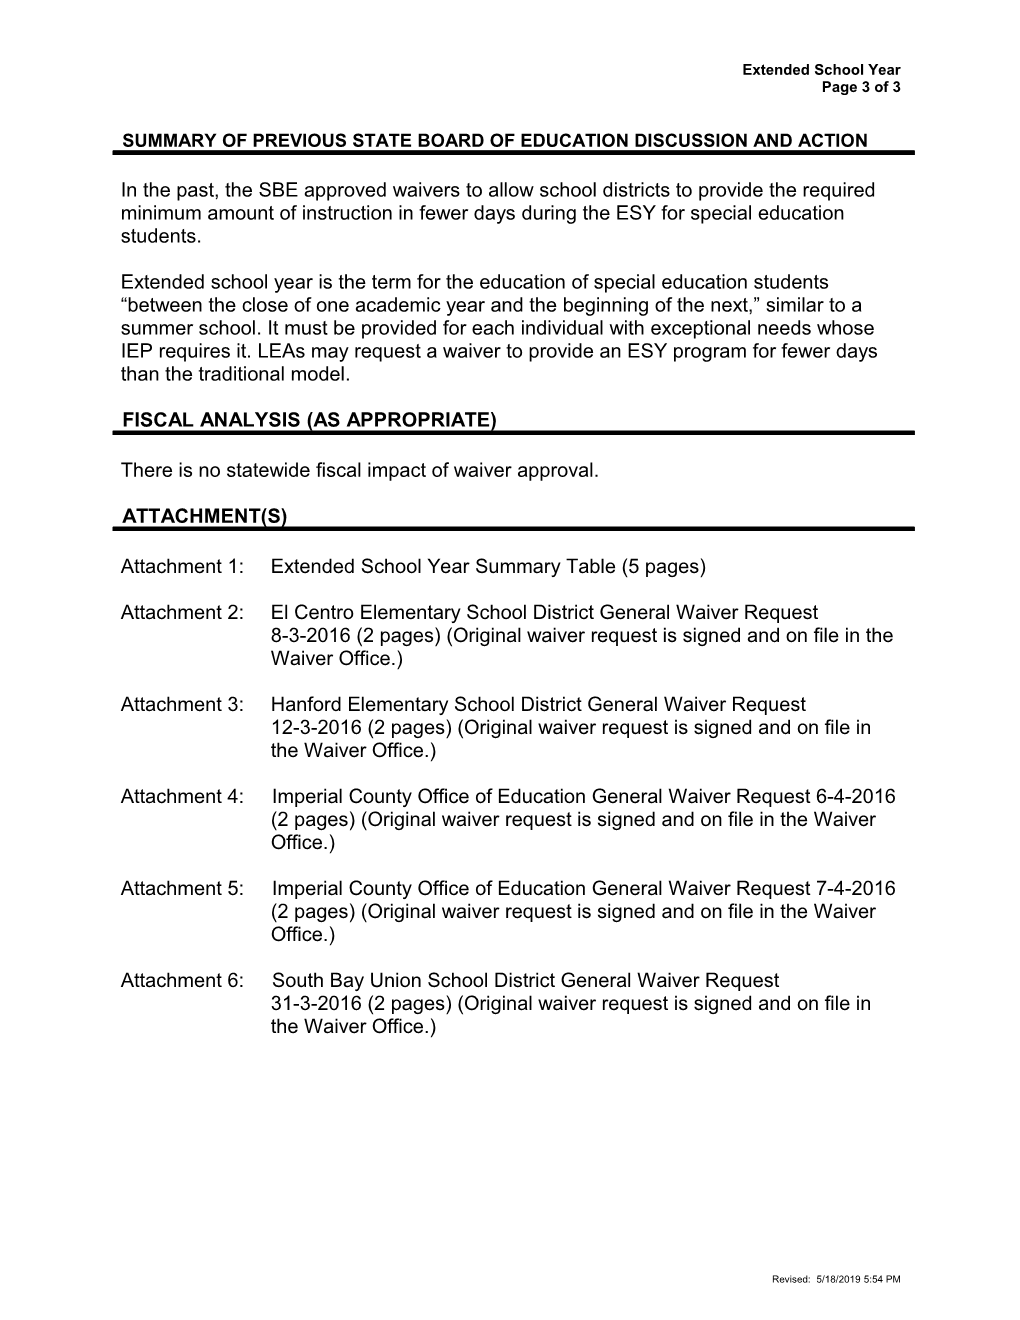 July 2016 Waiver Item W-04 - Meeting Agendas (CA State Board of Education)